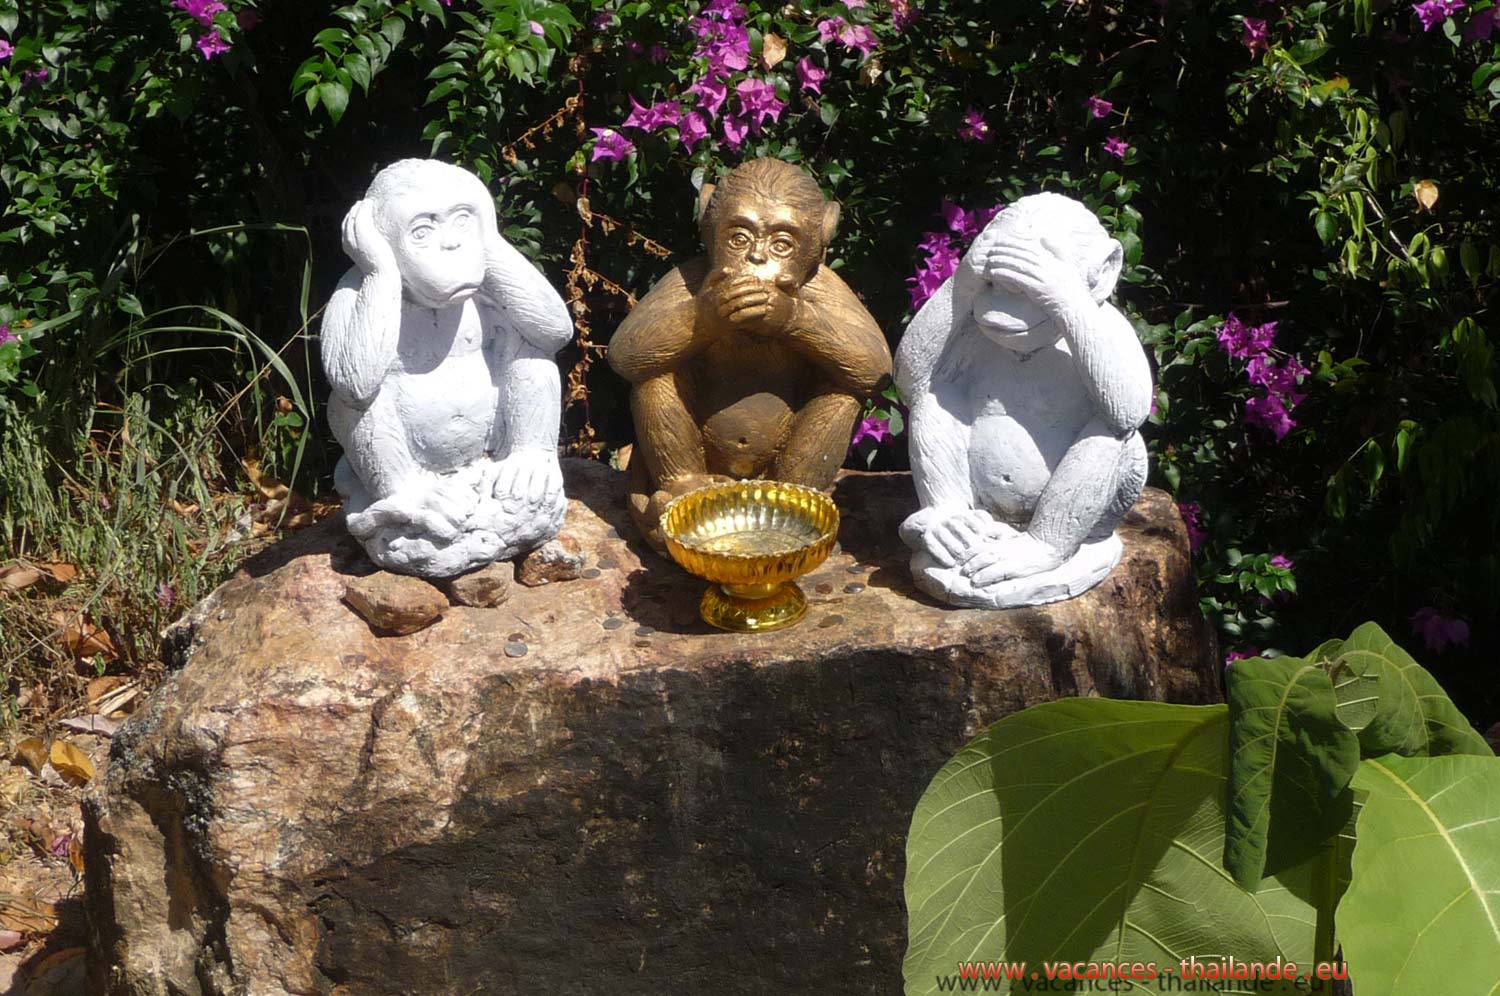 hree wise monkeys in very beautiful Buddhist temples in Thailand